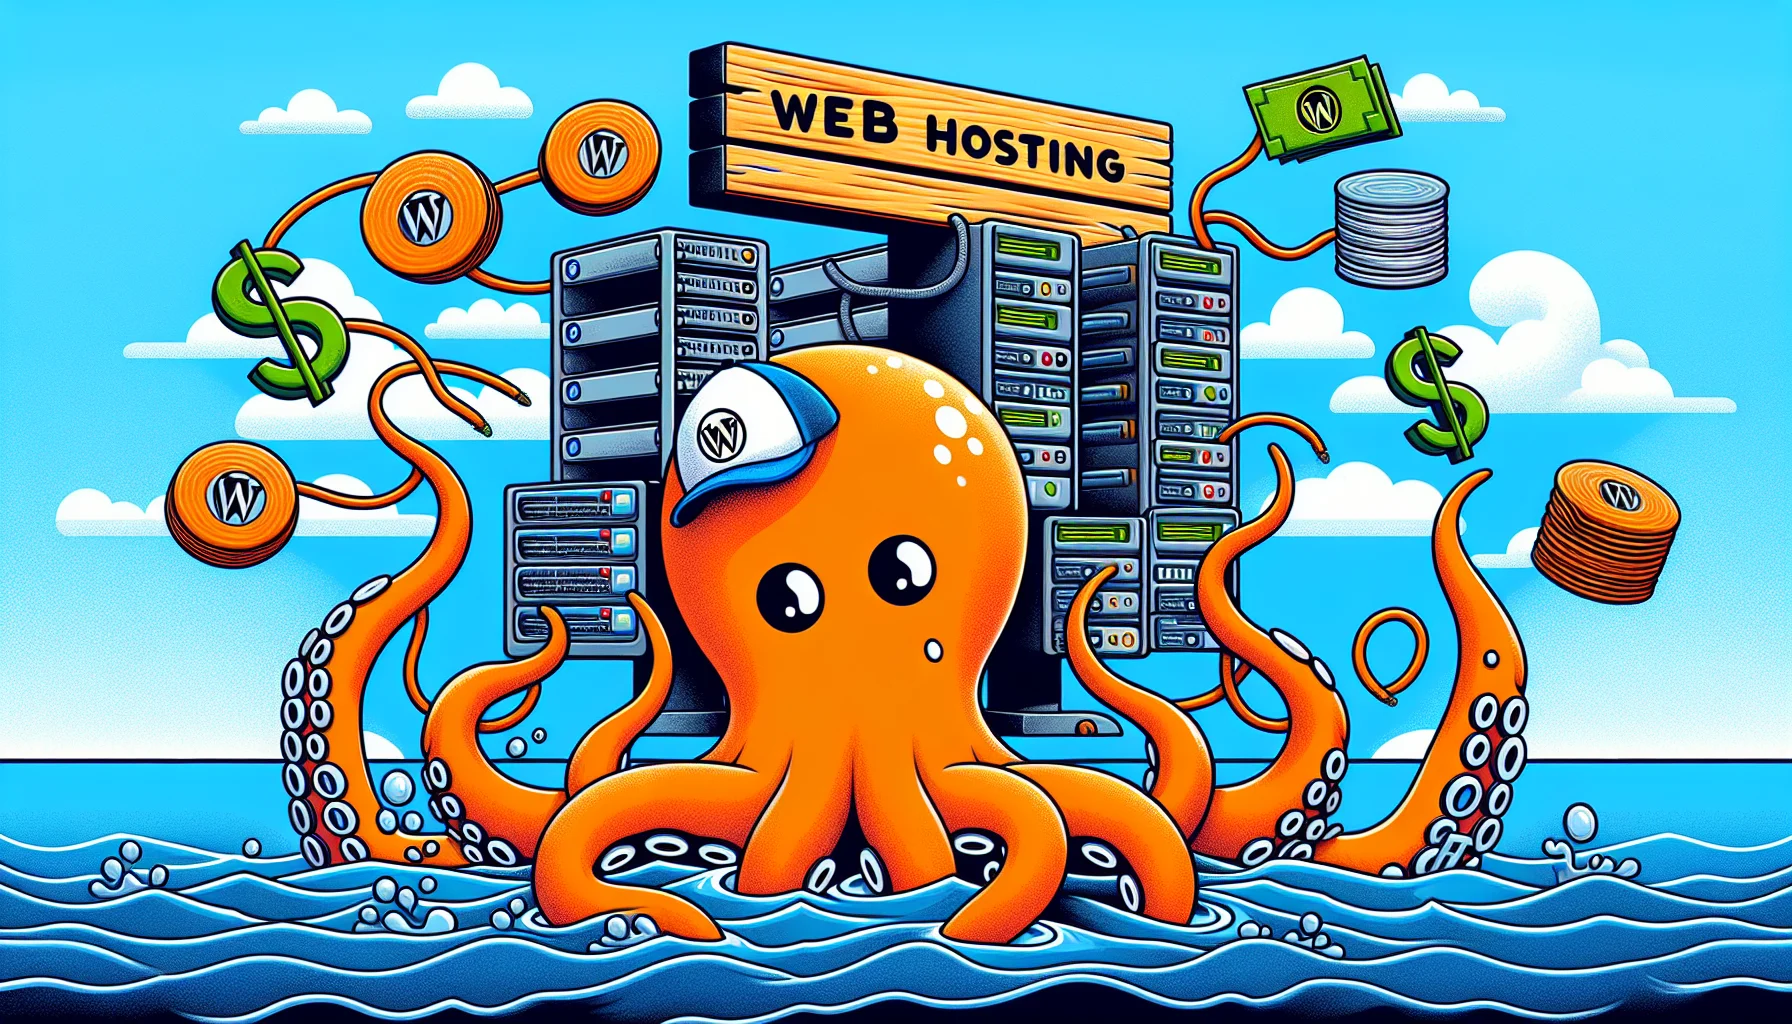 Create a humorous scenario involving an orange octopus whose tentacles are busily juggling various symbols related to web hosting such as server racks, databases and cloud symbols. The octopus is wearing a cap with a W logo, denoting its expertise in WordPress. Behind the octopus, there's a signboard with 'GoDaddy' inscribed on it, surrounded by comic dollar signs alluding to enticing deals. The oceanic background, with submarine cables, further underlines the concept of internet connectivity. Colors should be bright and appealing, with clear contrast between the elements.